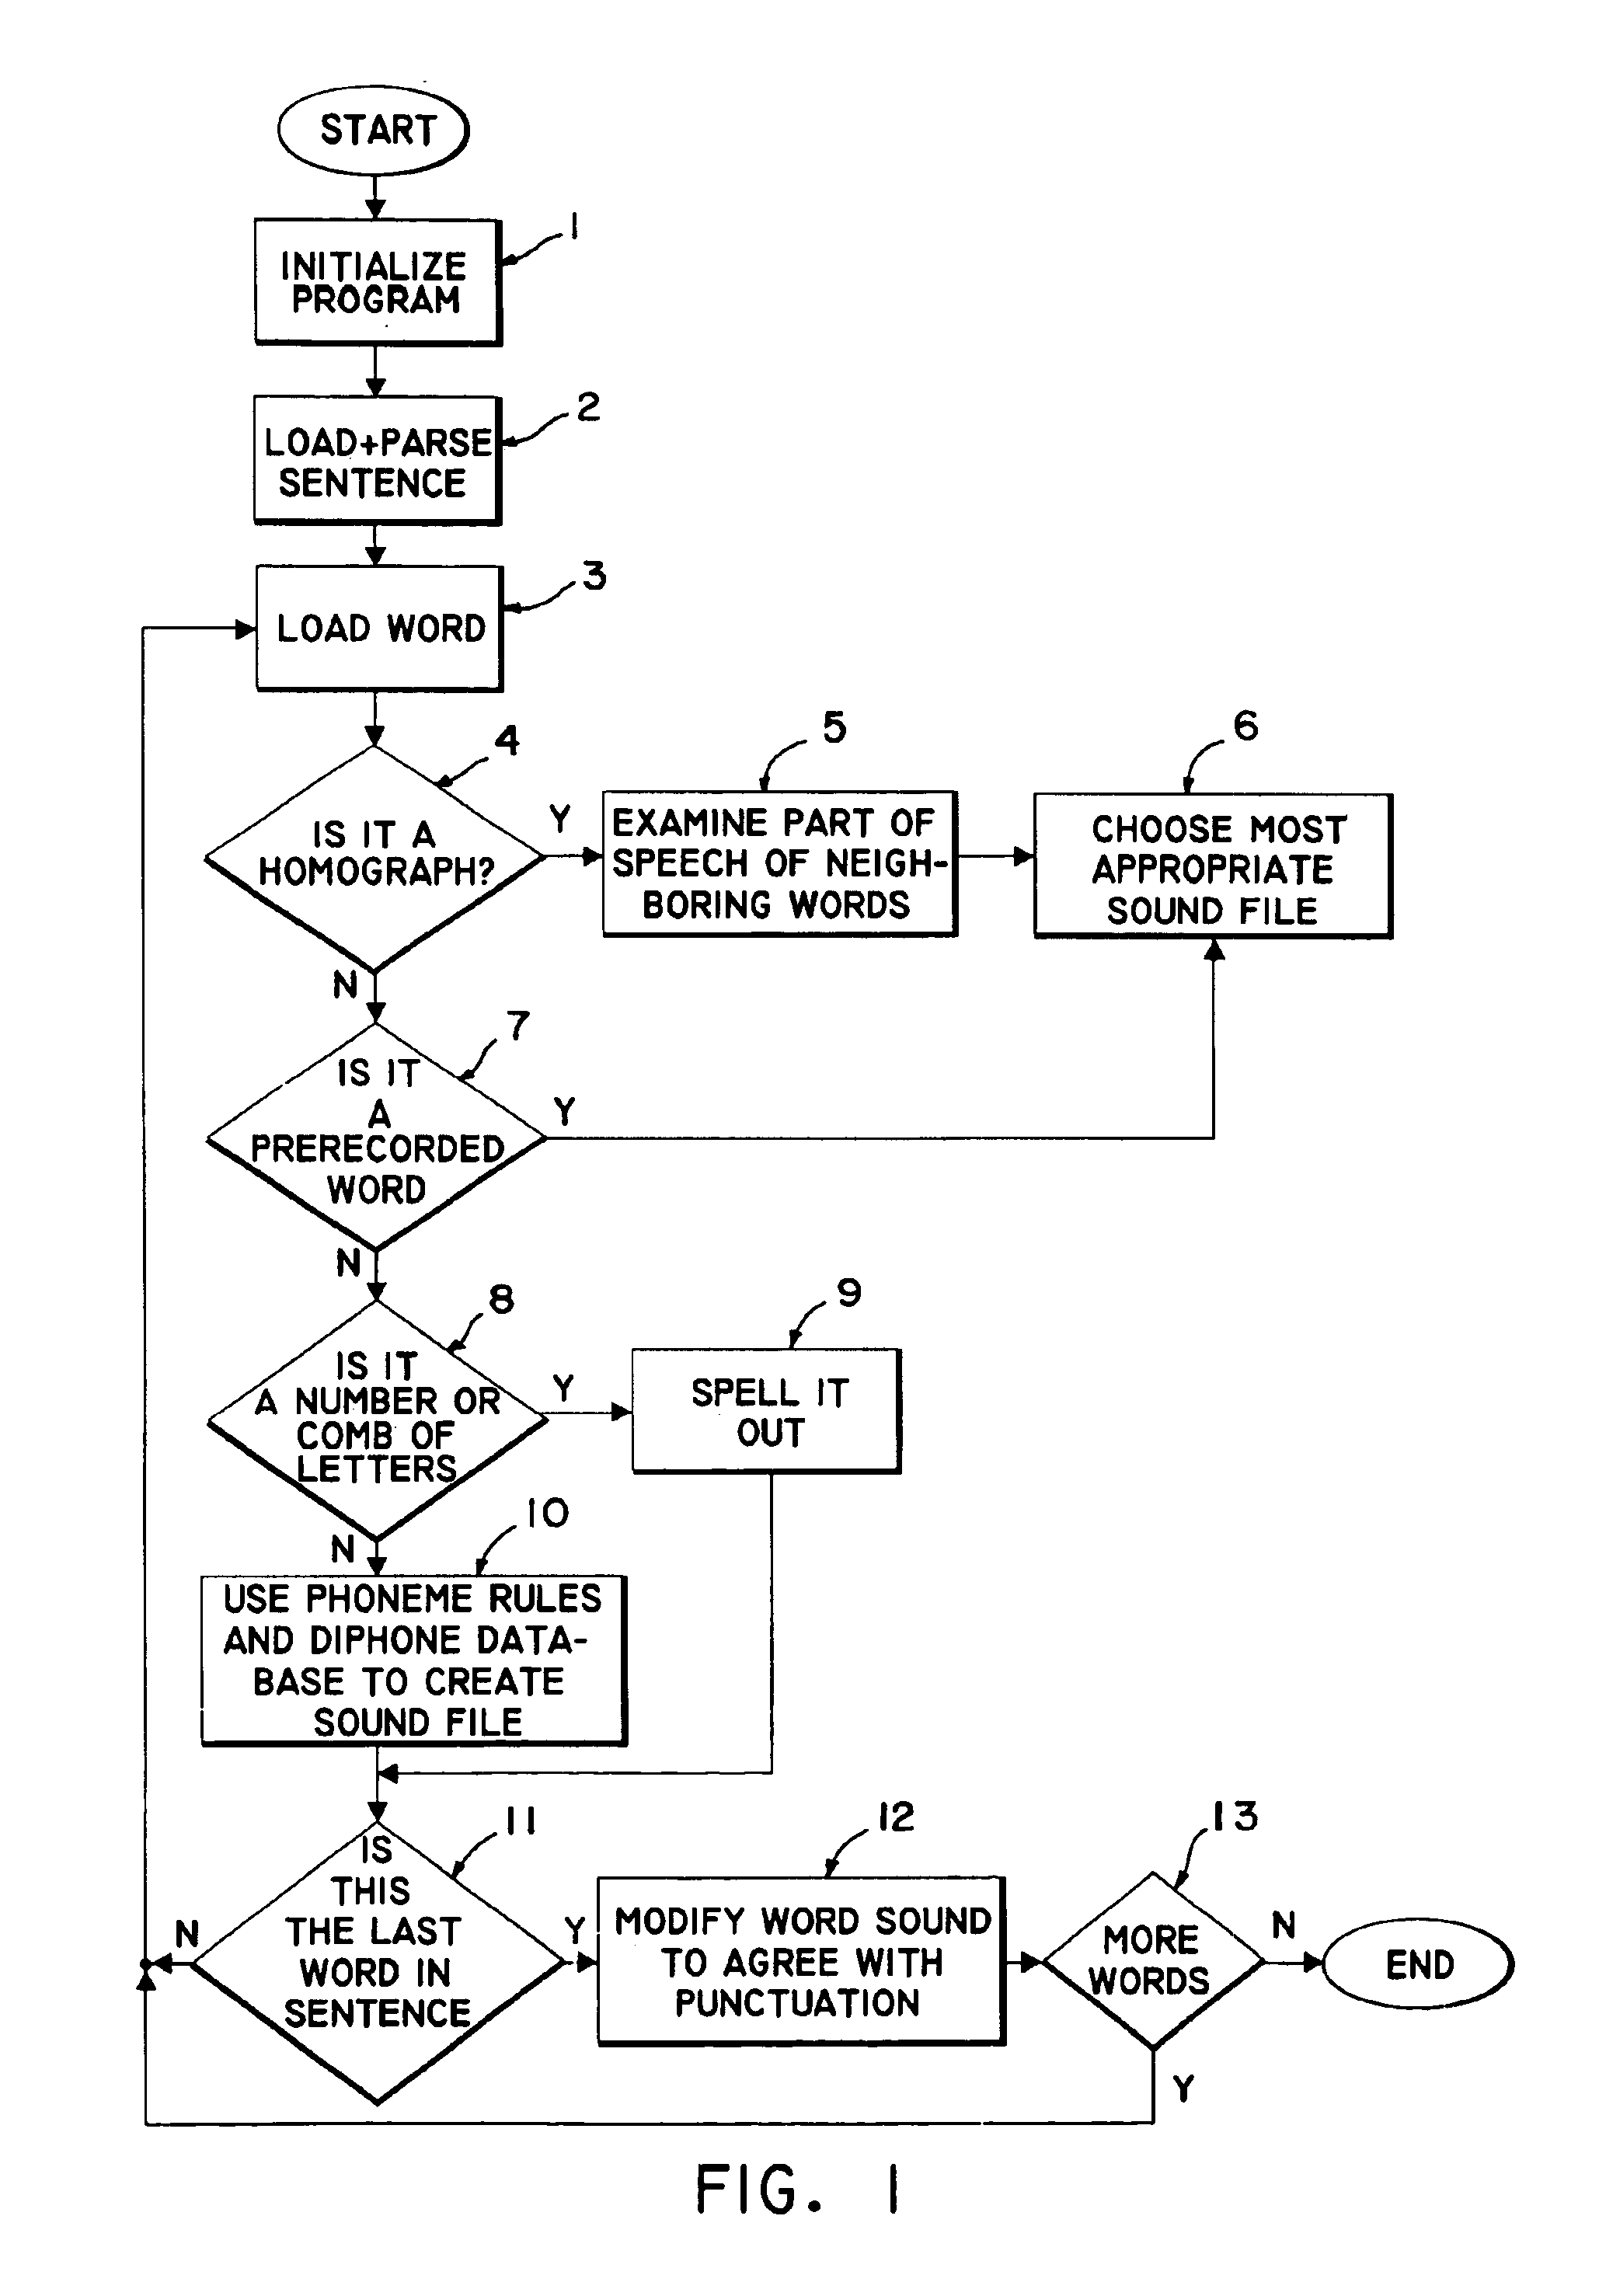 Method for producing a speech rendition of text from diphone sounds